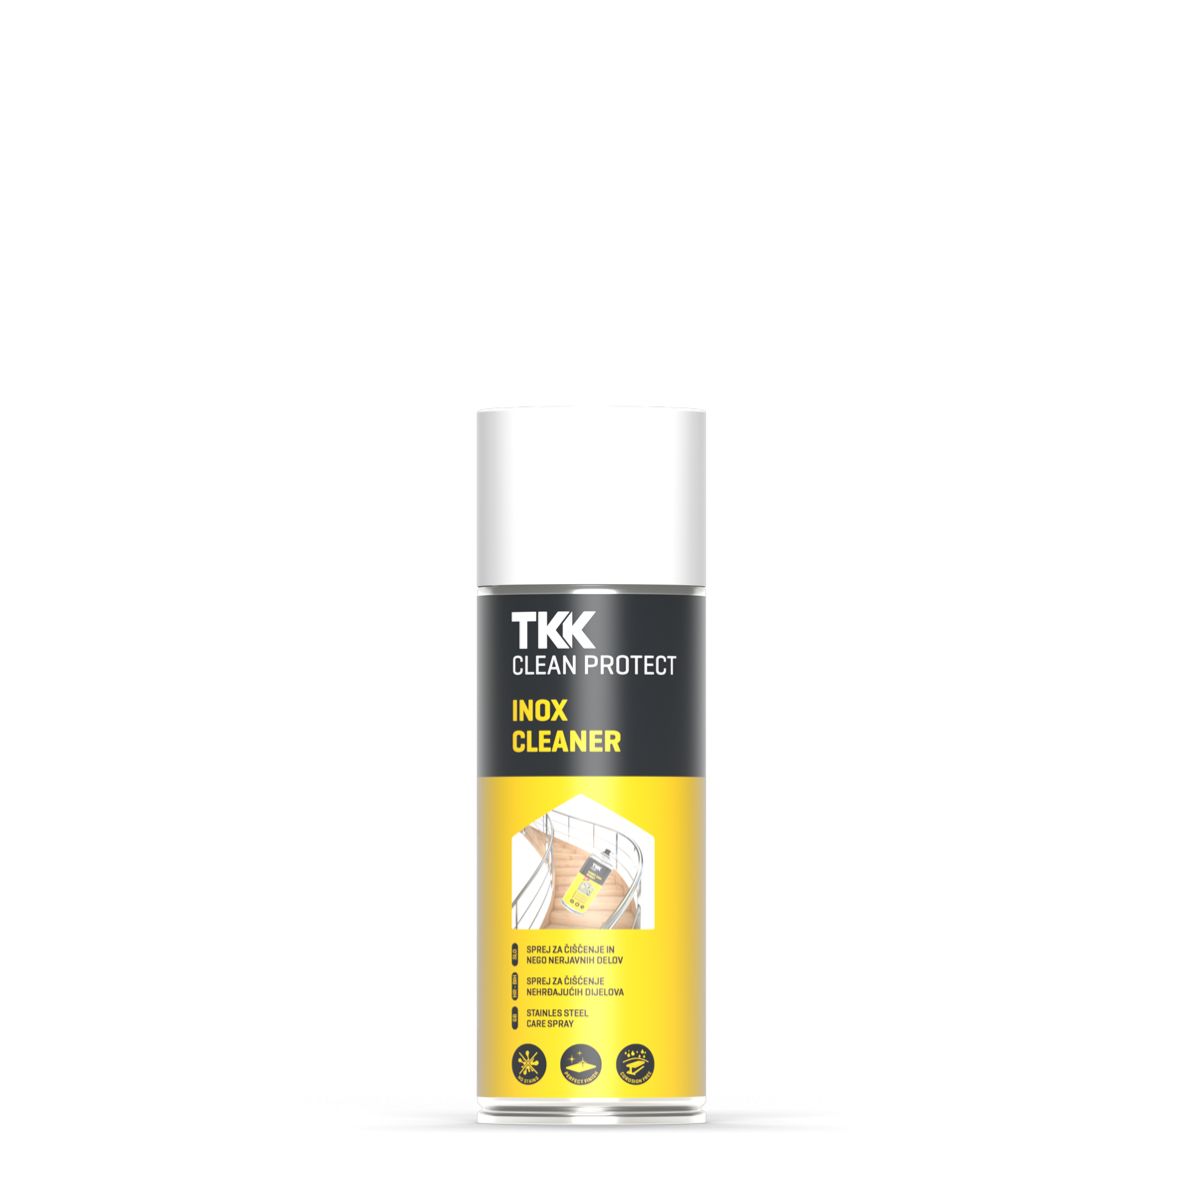 Clean protect inox cleaner